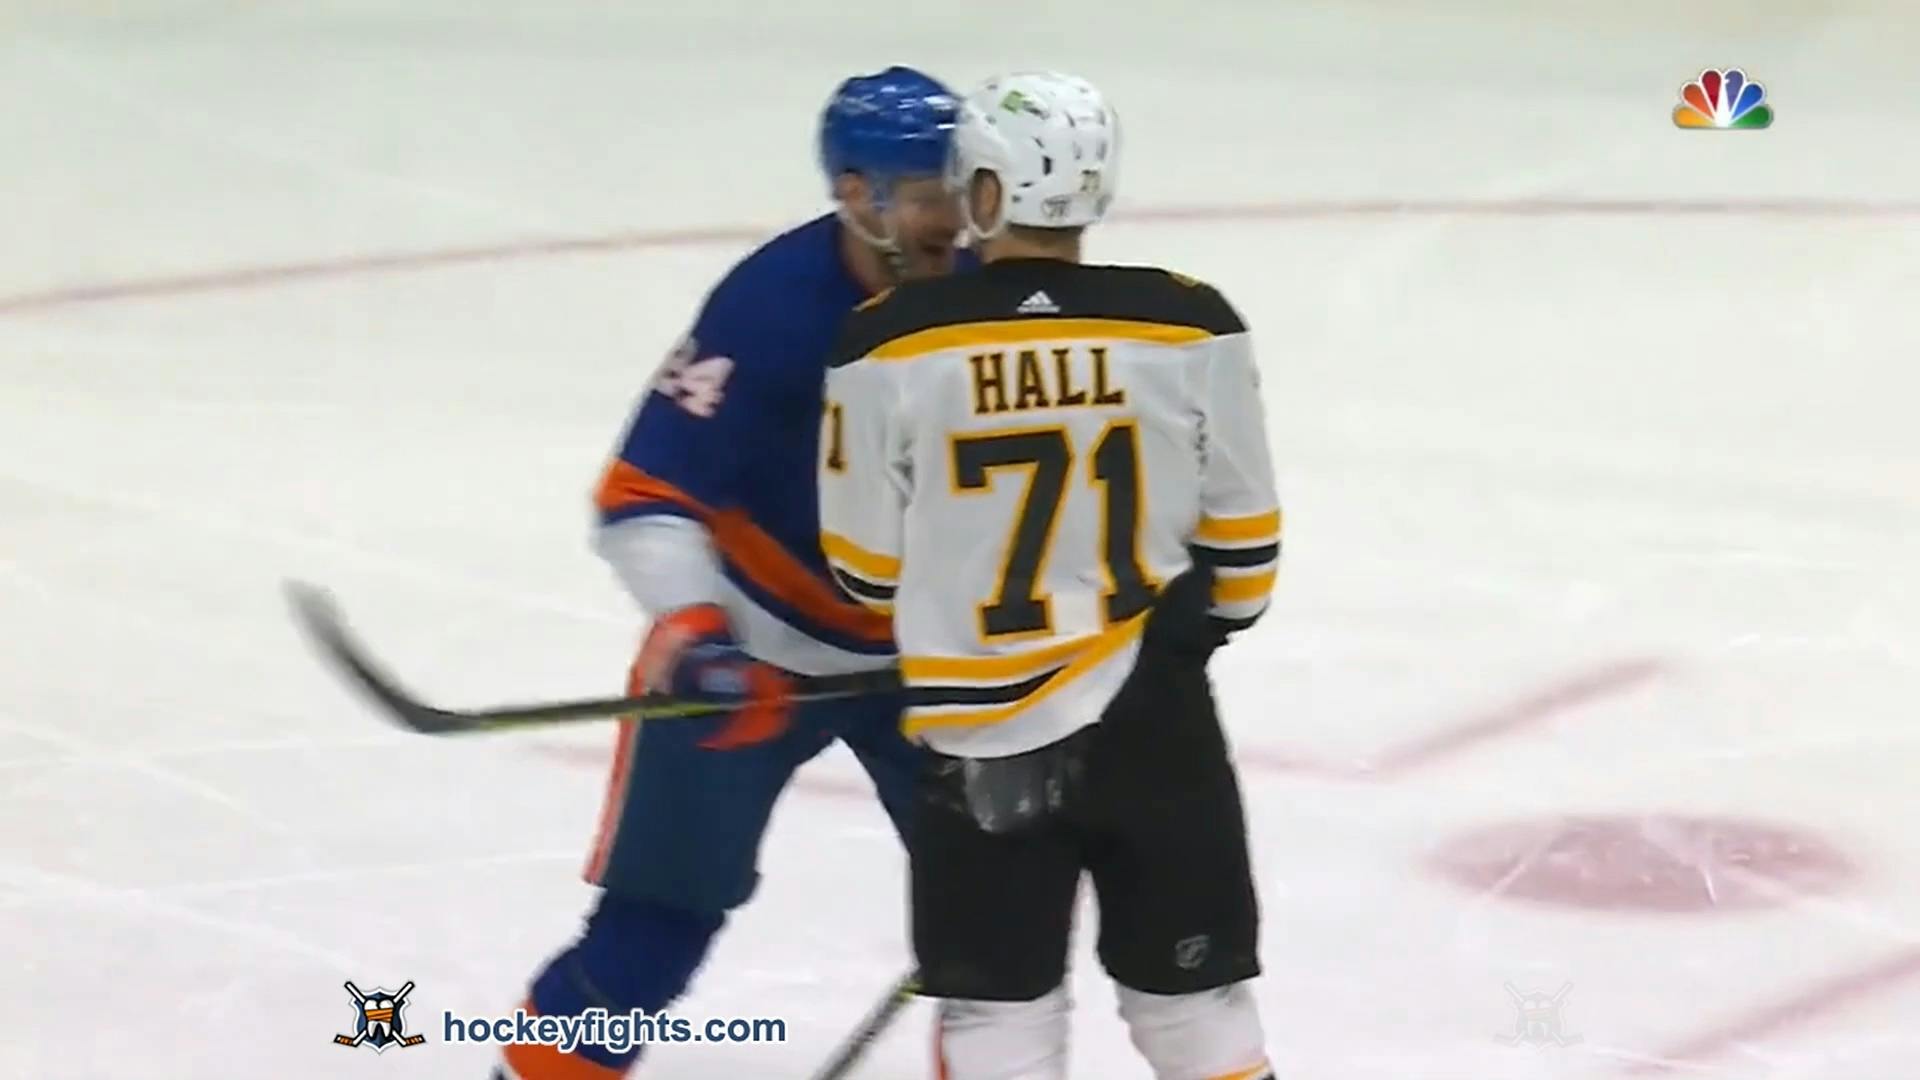 T. Hall (BOS) vs. S. Mayfield (NYI)